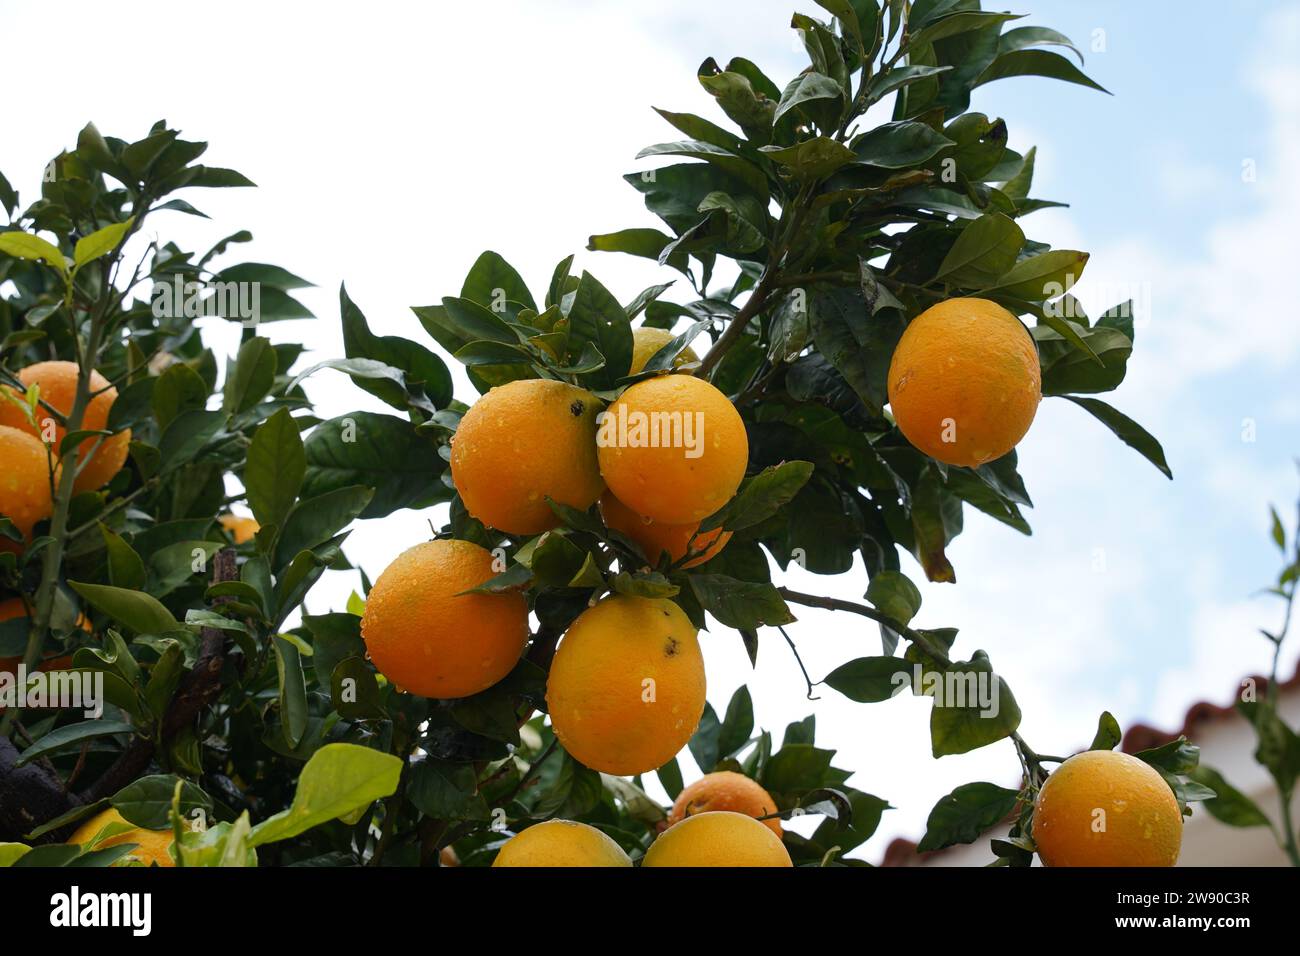 Oranges on a branch with green leaves on tree, and drops of water on them Stock Photo